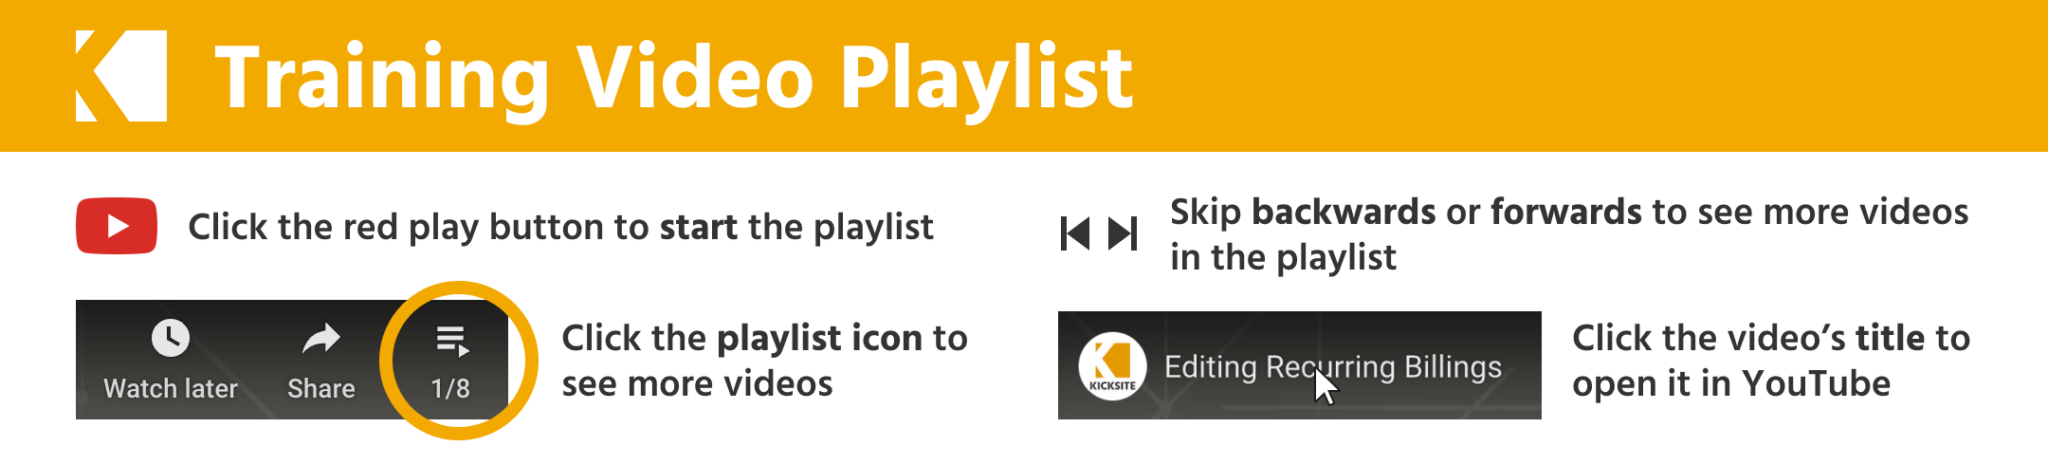 Click the red play button to start the playlist. Click the playlist icon to view more videos. Skip backwards or forwards to see more videos in the playlist. Click the video’s title to open it in YouTube.